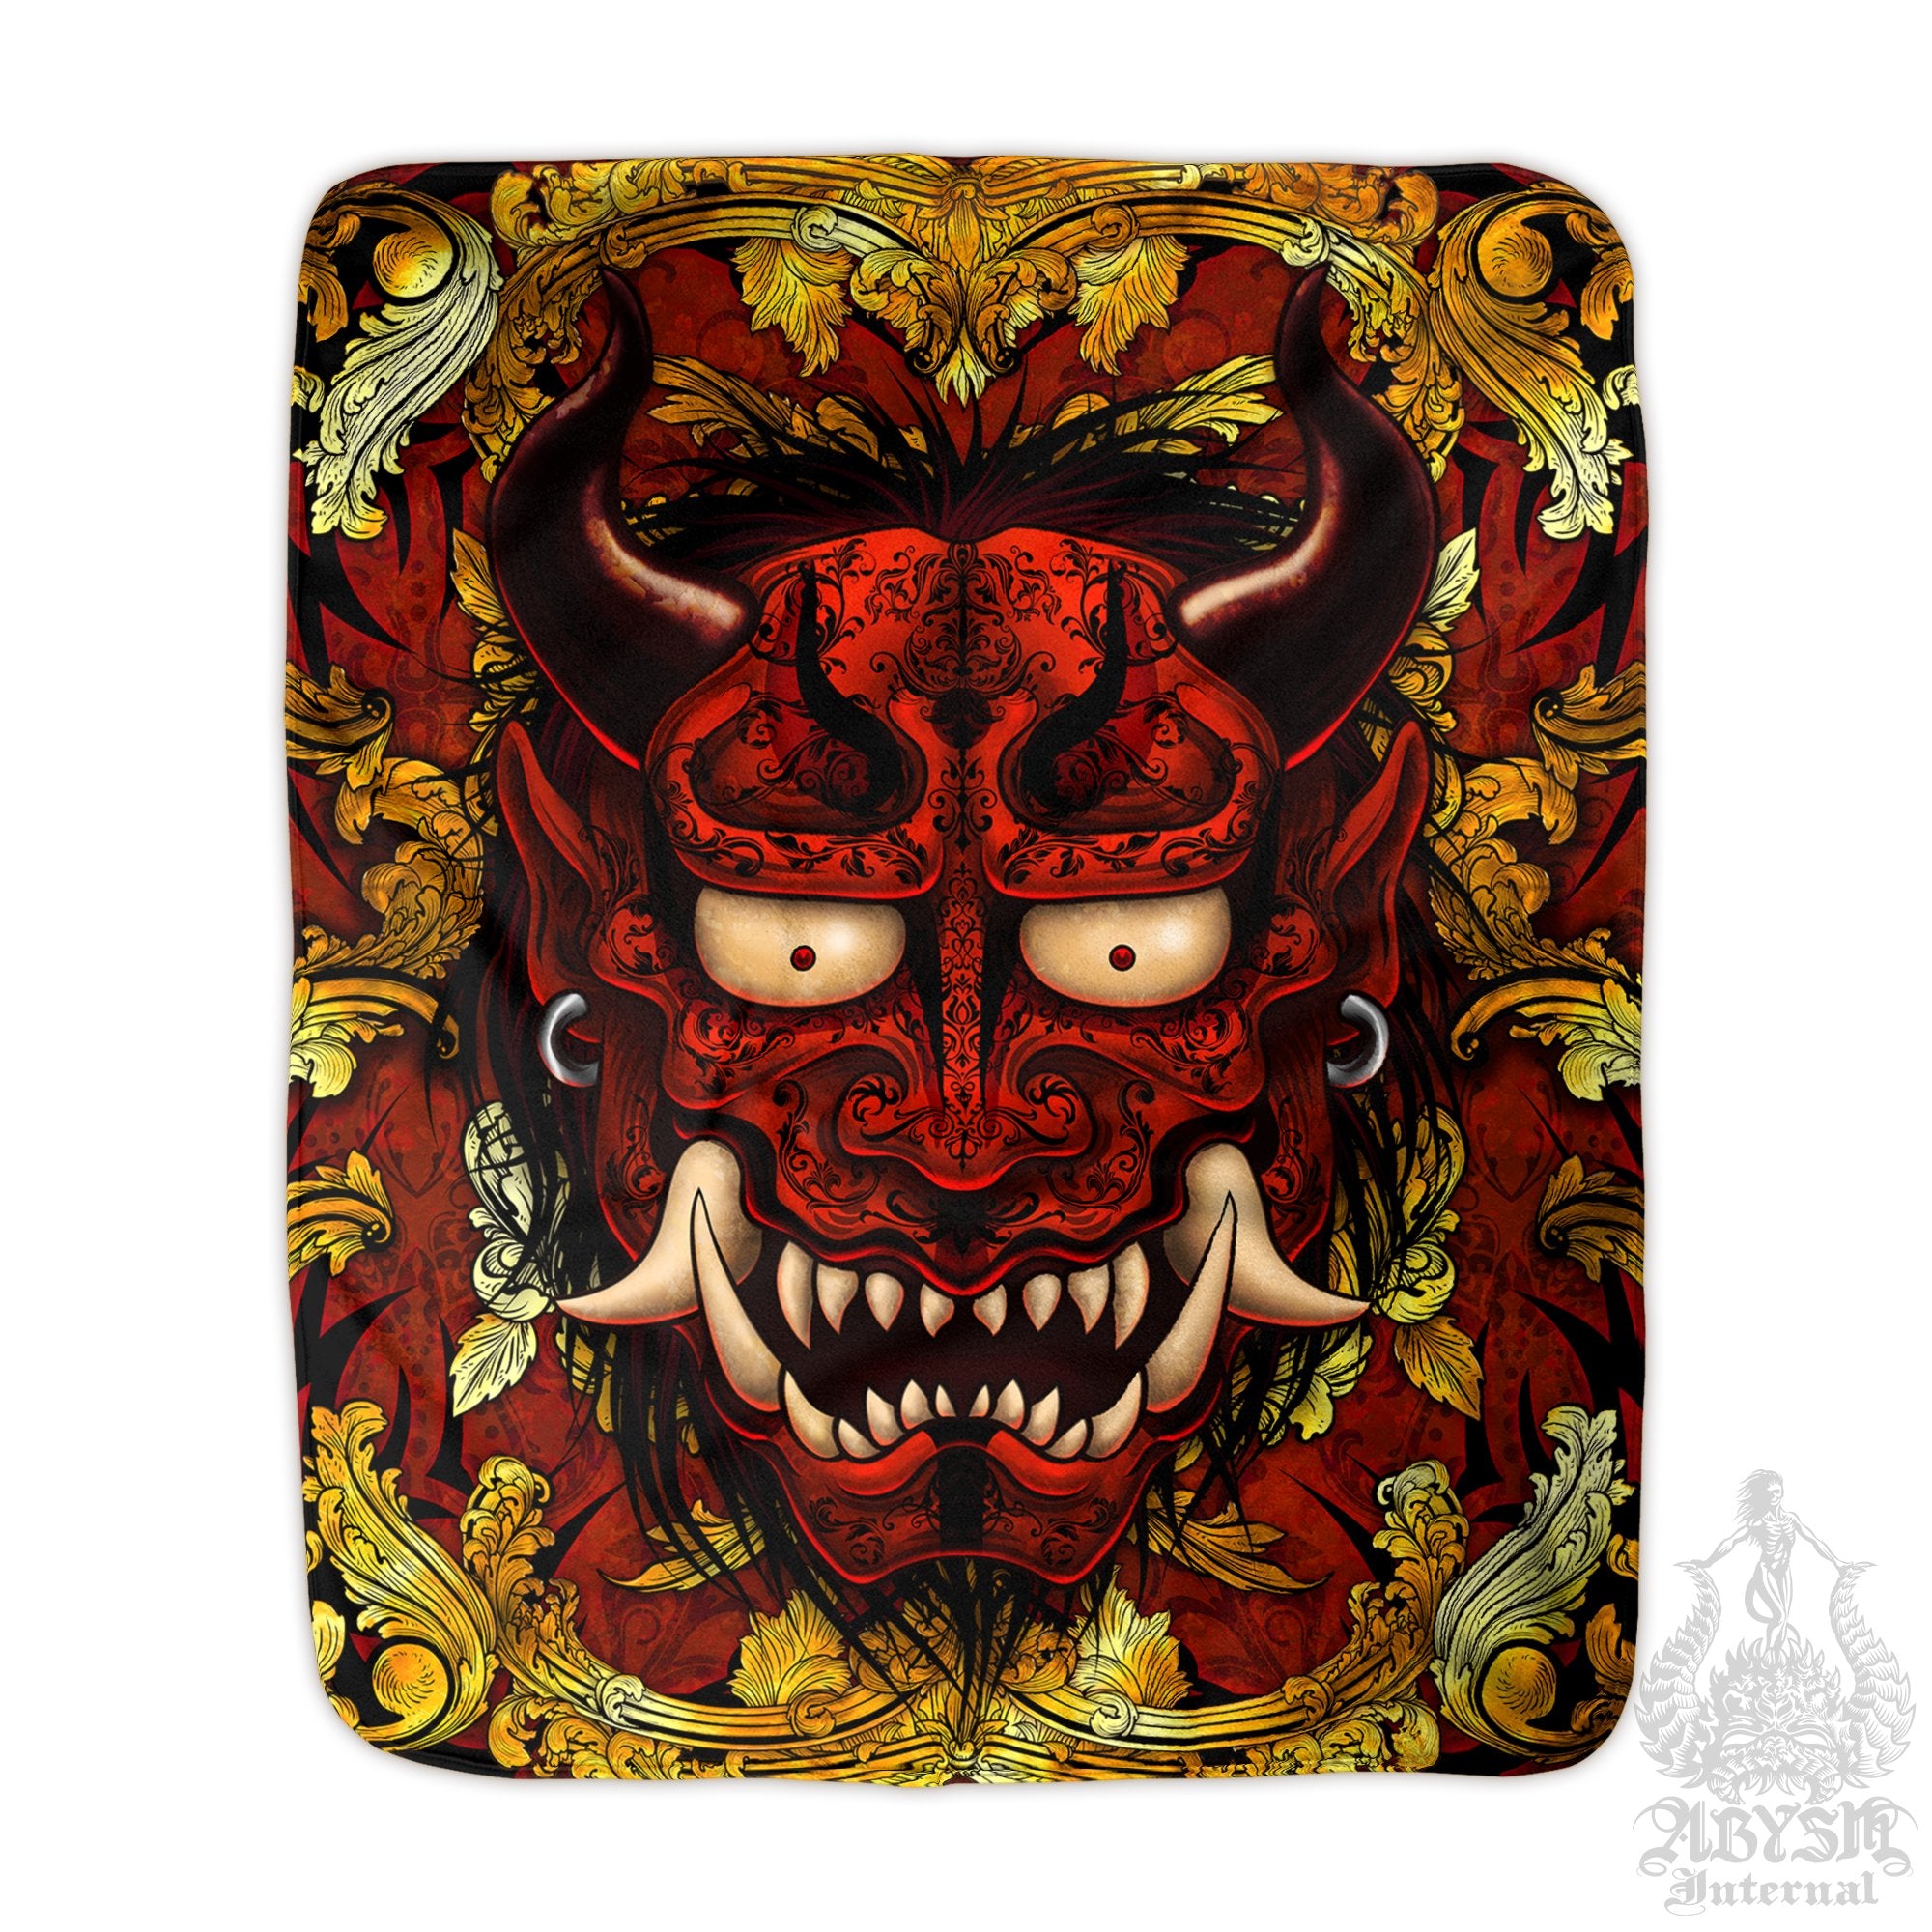 Gold Oni Sherpa Fleece Throw Blanket, Japanese Demon, Alternative and Goth Home Decor - Black and Red, 2 Colors - Abysm Internal